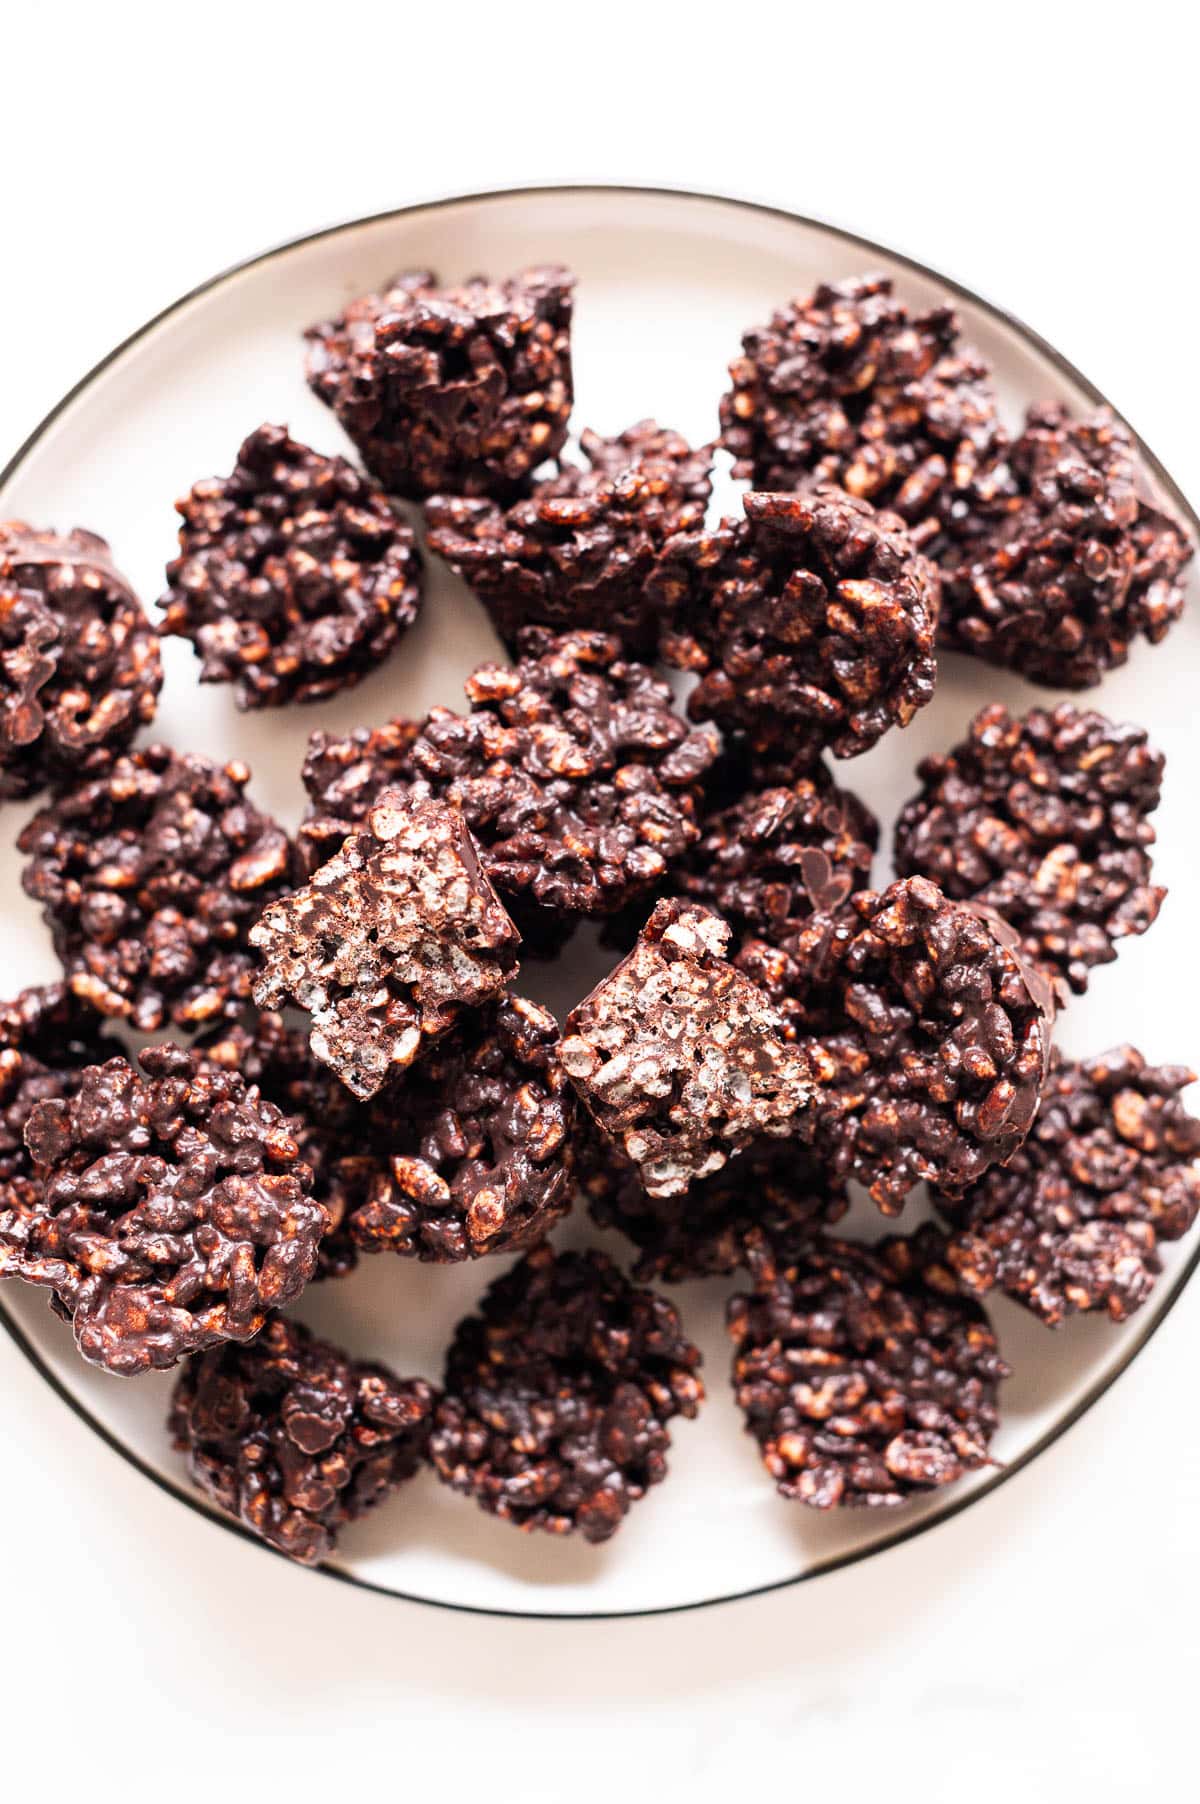 Chocolate rice krispie treats on a plate with one cut in half showing texture.